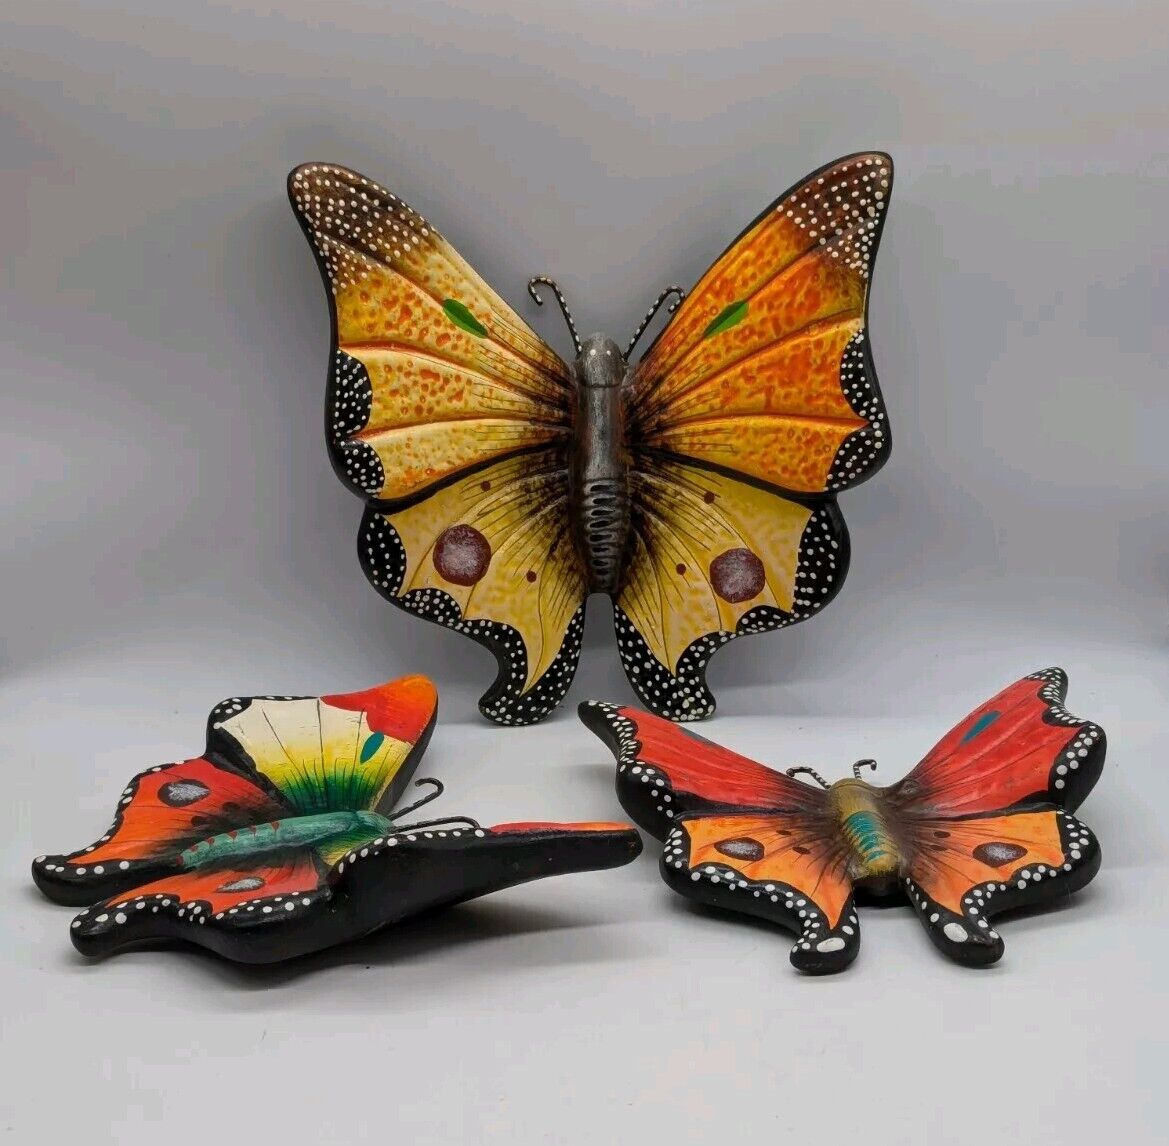 Vintage Colorful Butterfly Folk Art Mexican Pottery Wall Art Home Decor Set Of 3